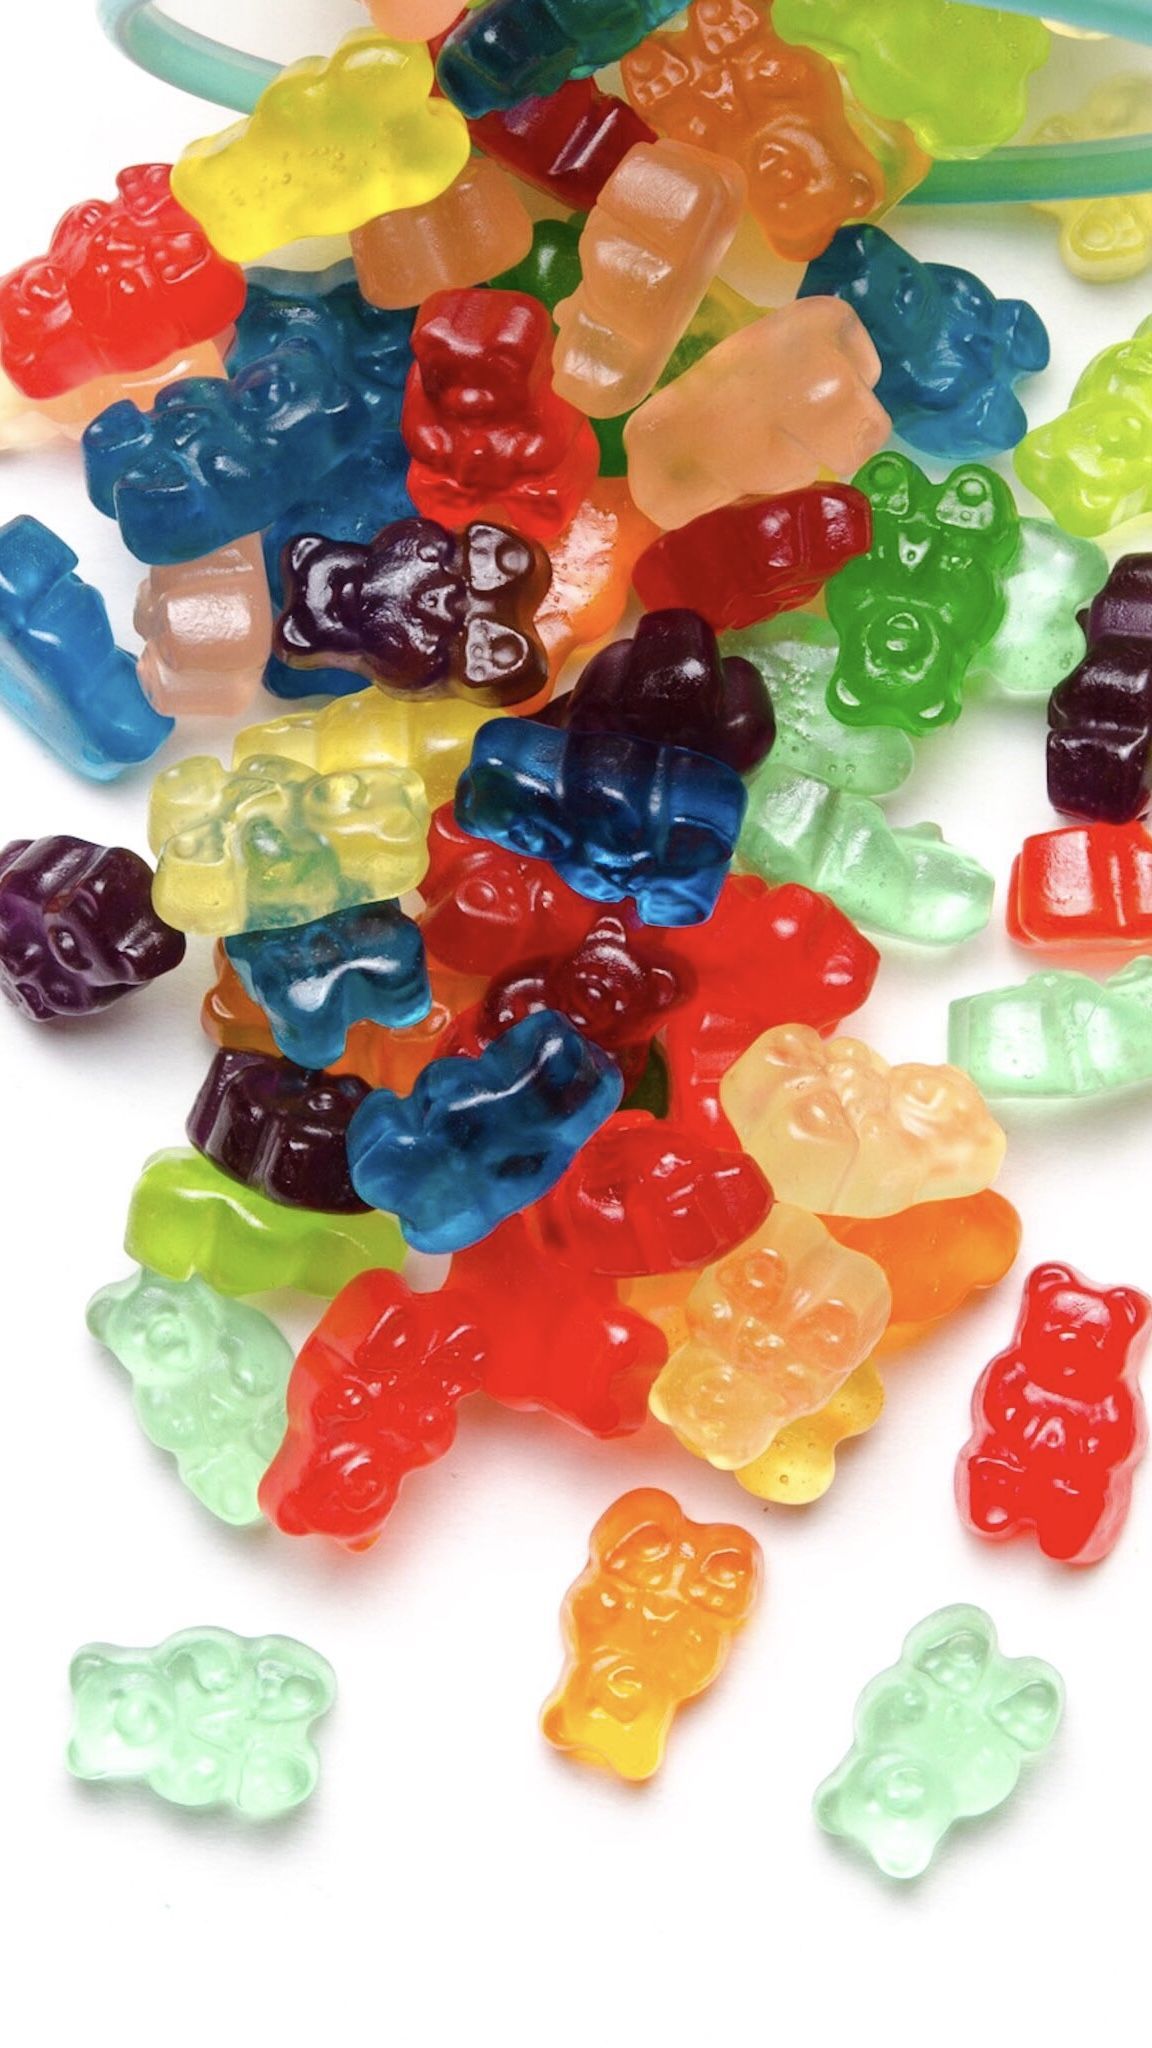 Classic #GummiBears are always a hit